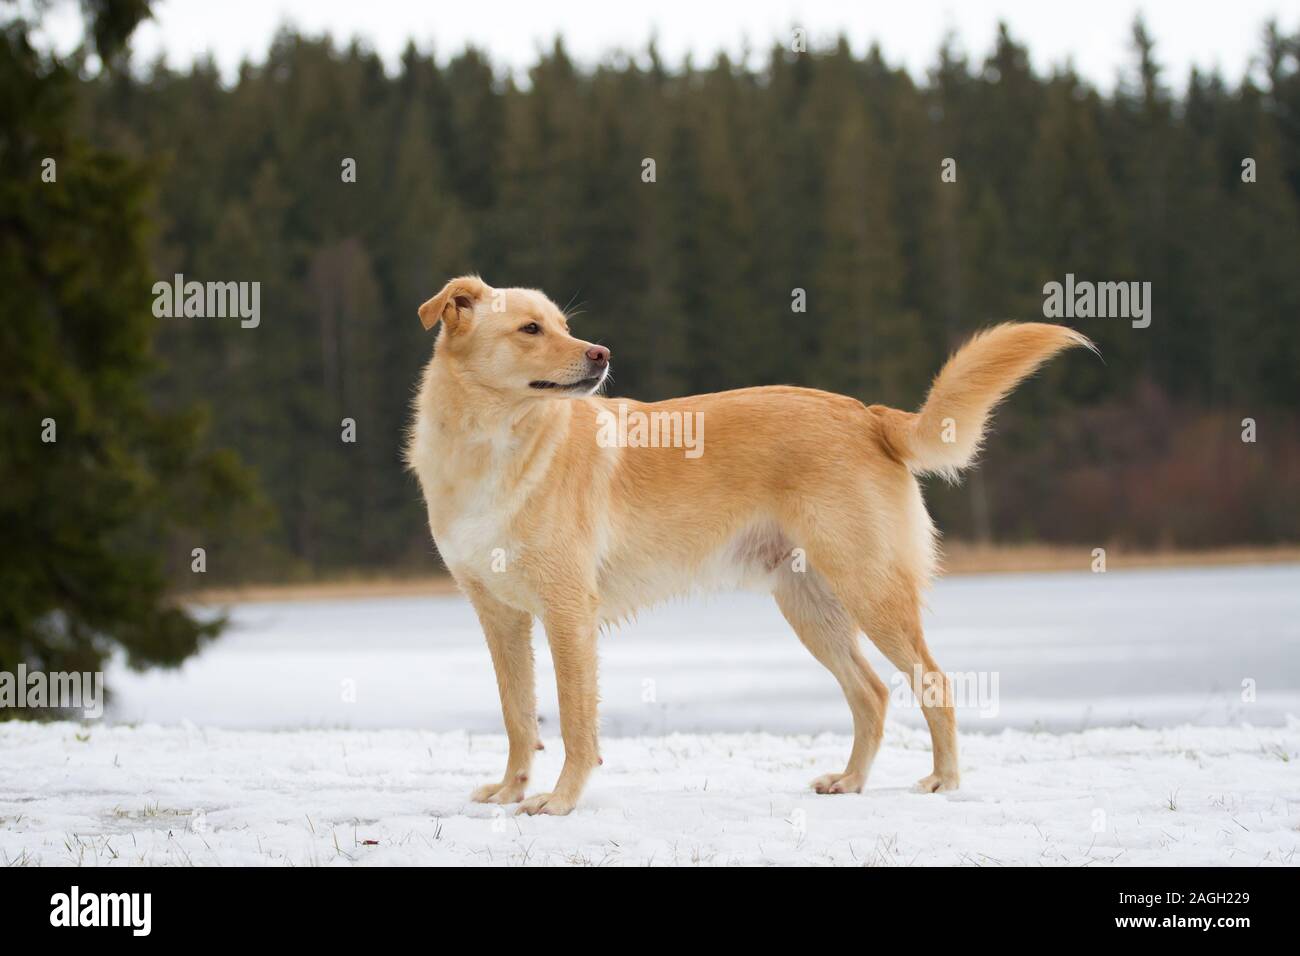 Mixbreed dog standing, from the side Stock Photo